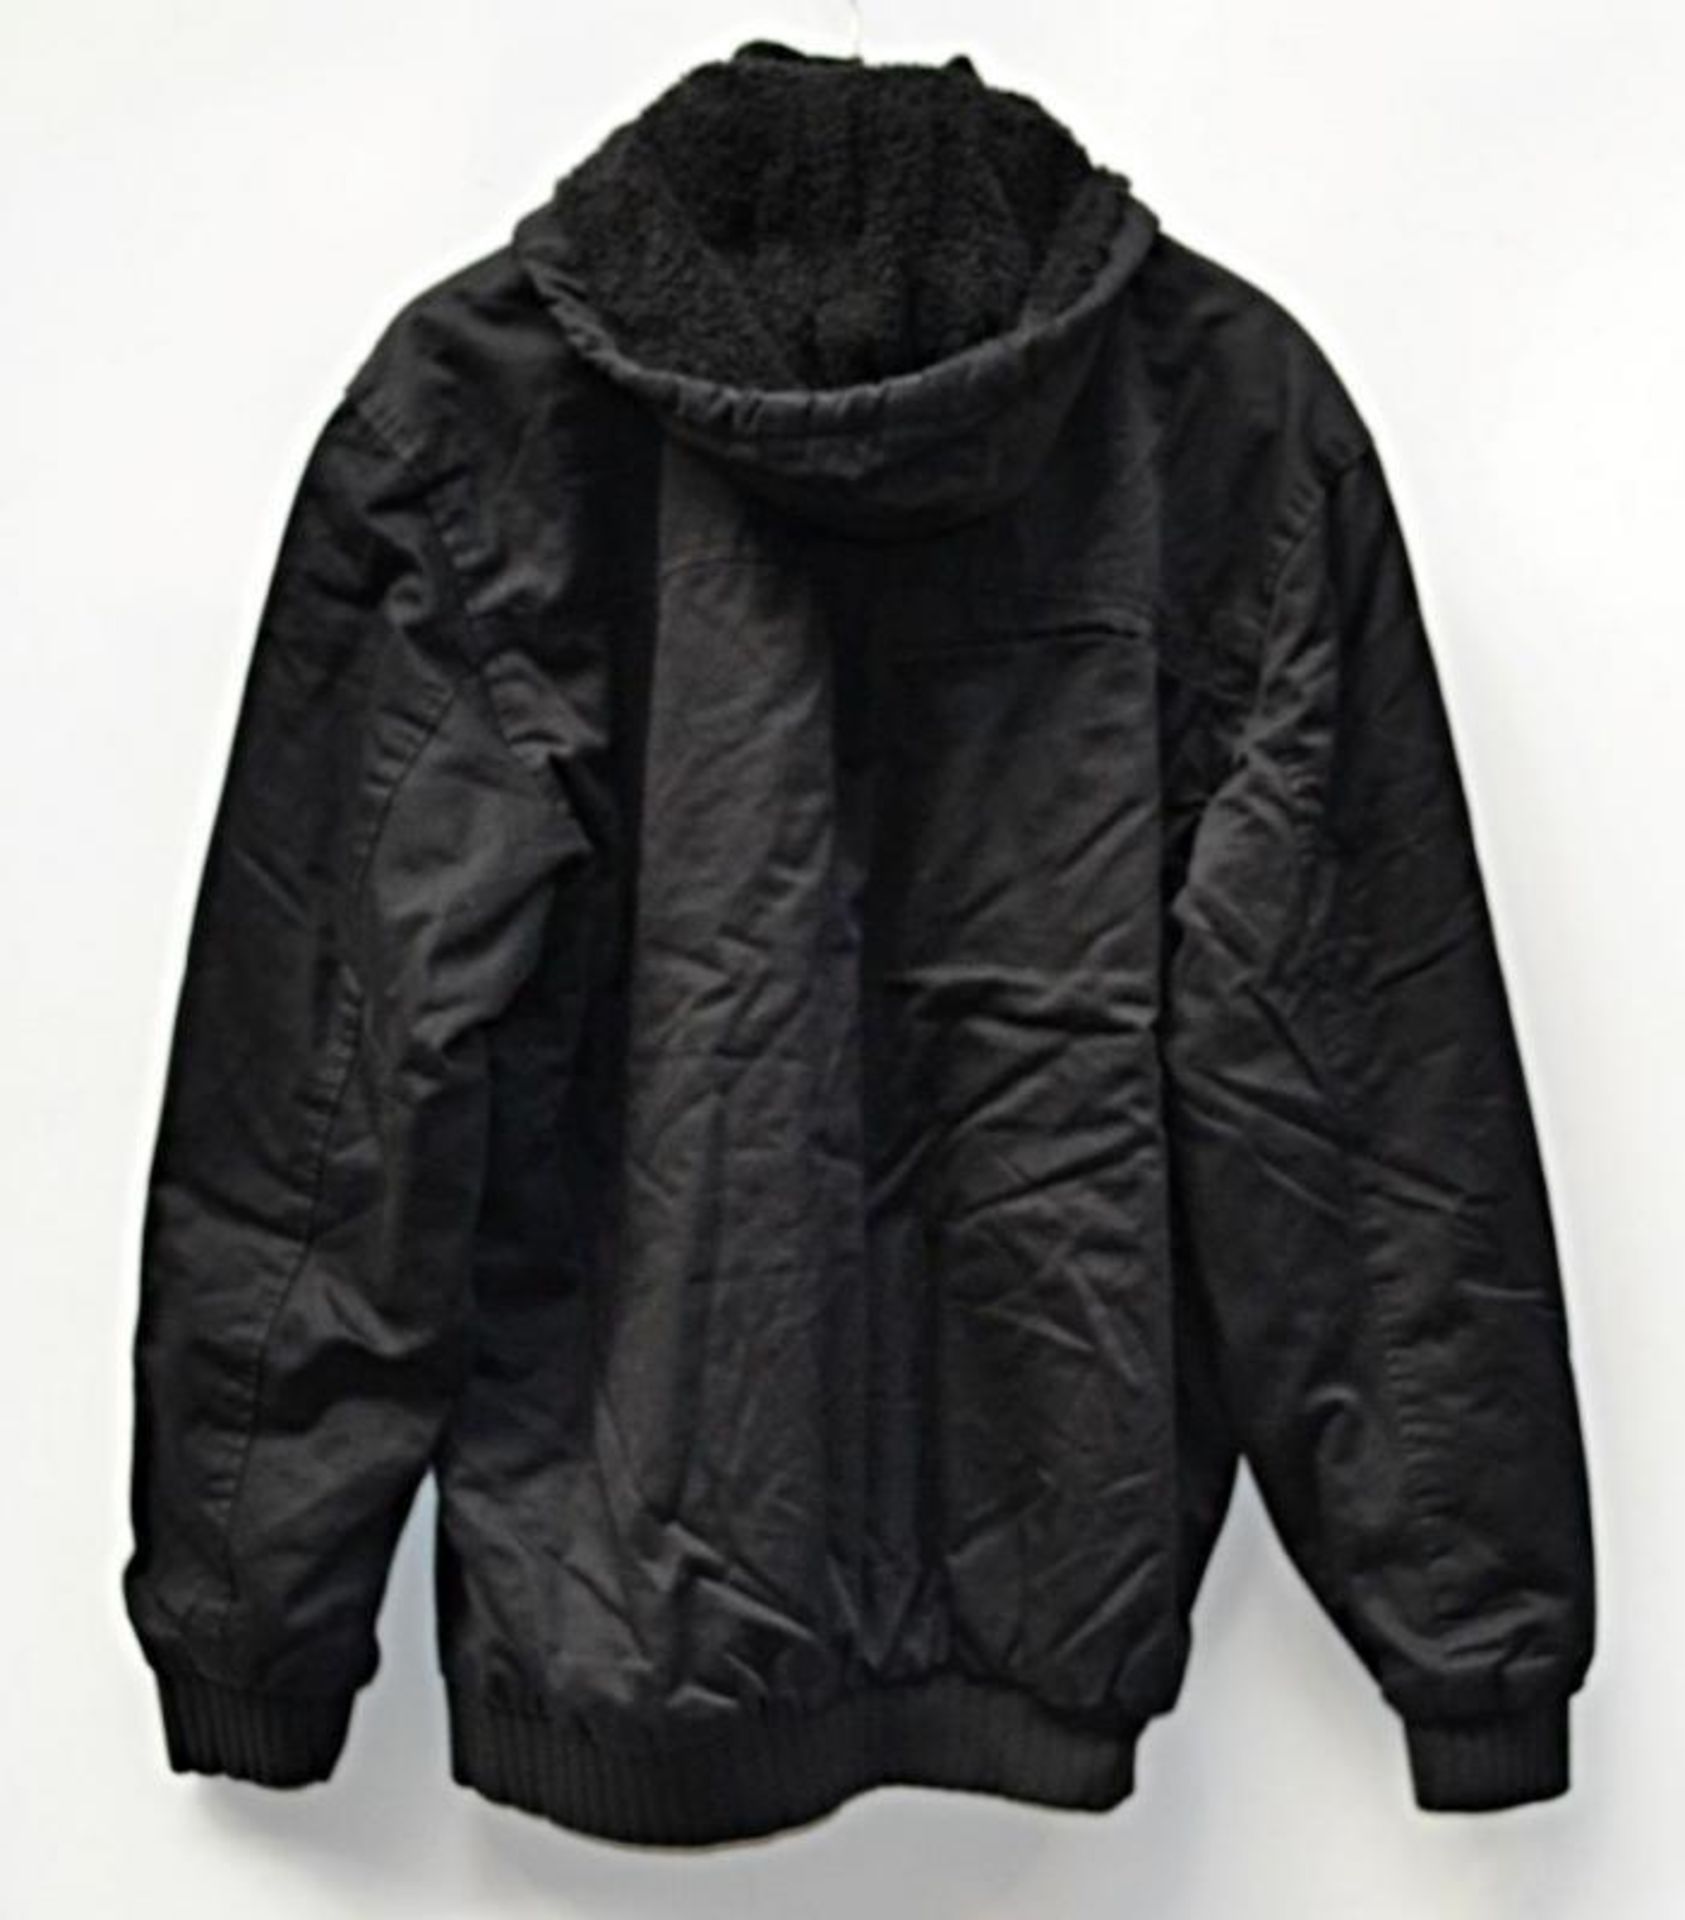 1 x Mens Zip-Up Cotton Jacket With Plush Lining And Removable Hood - New With Tags - Recent Store - Image 3 of 8